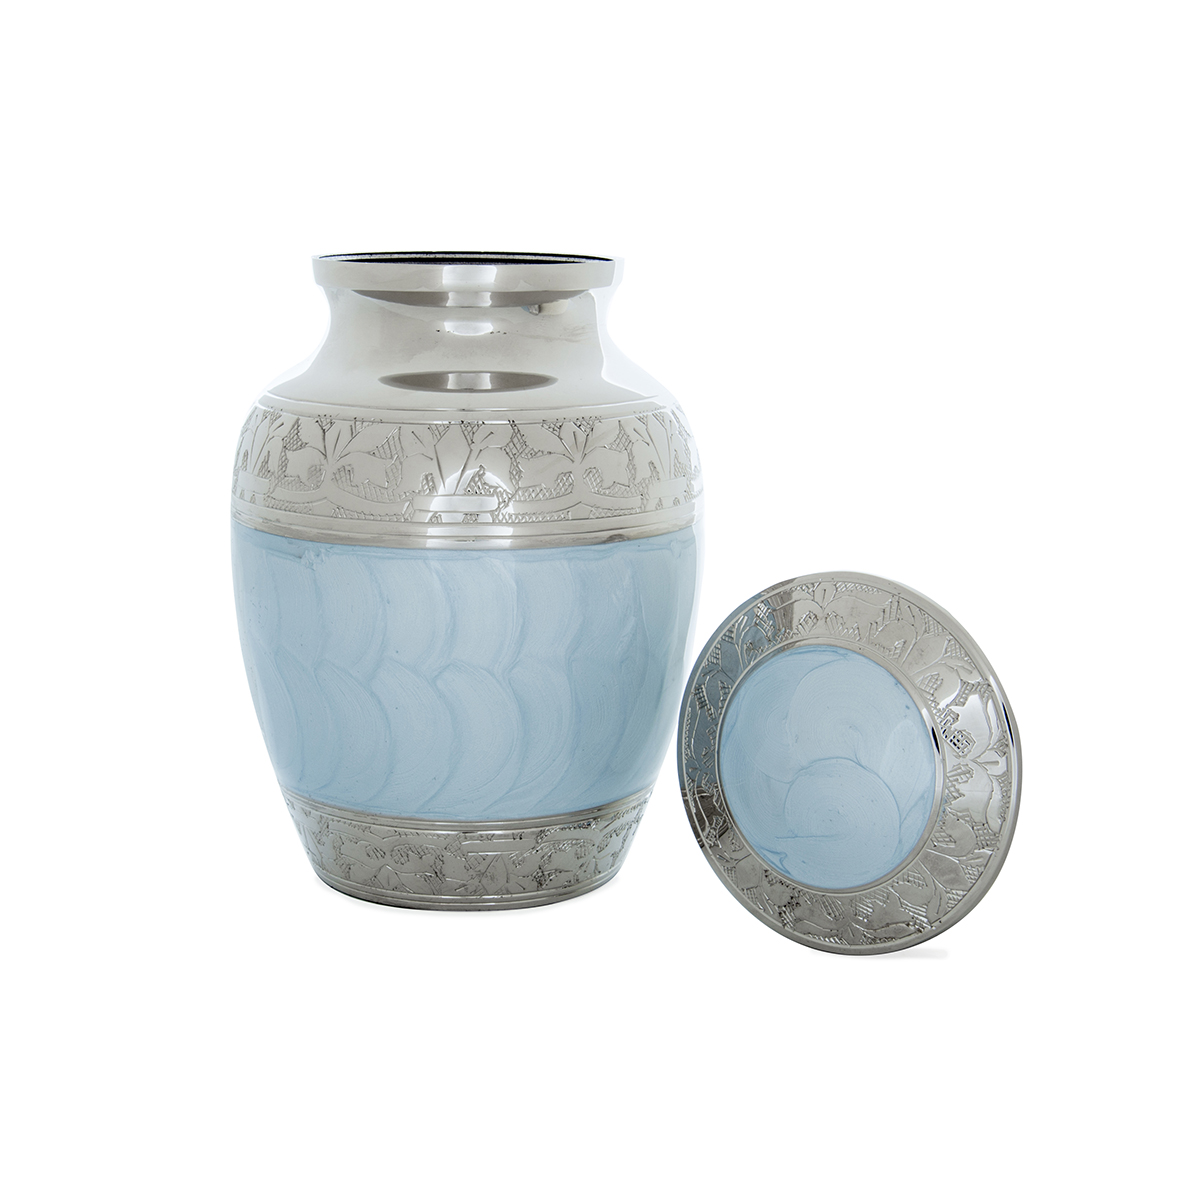 Amia Engraved Cremation Urn- polished nickel/pale blue ...